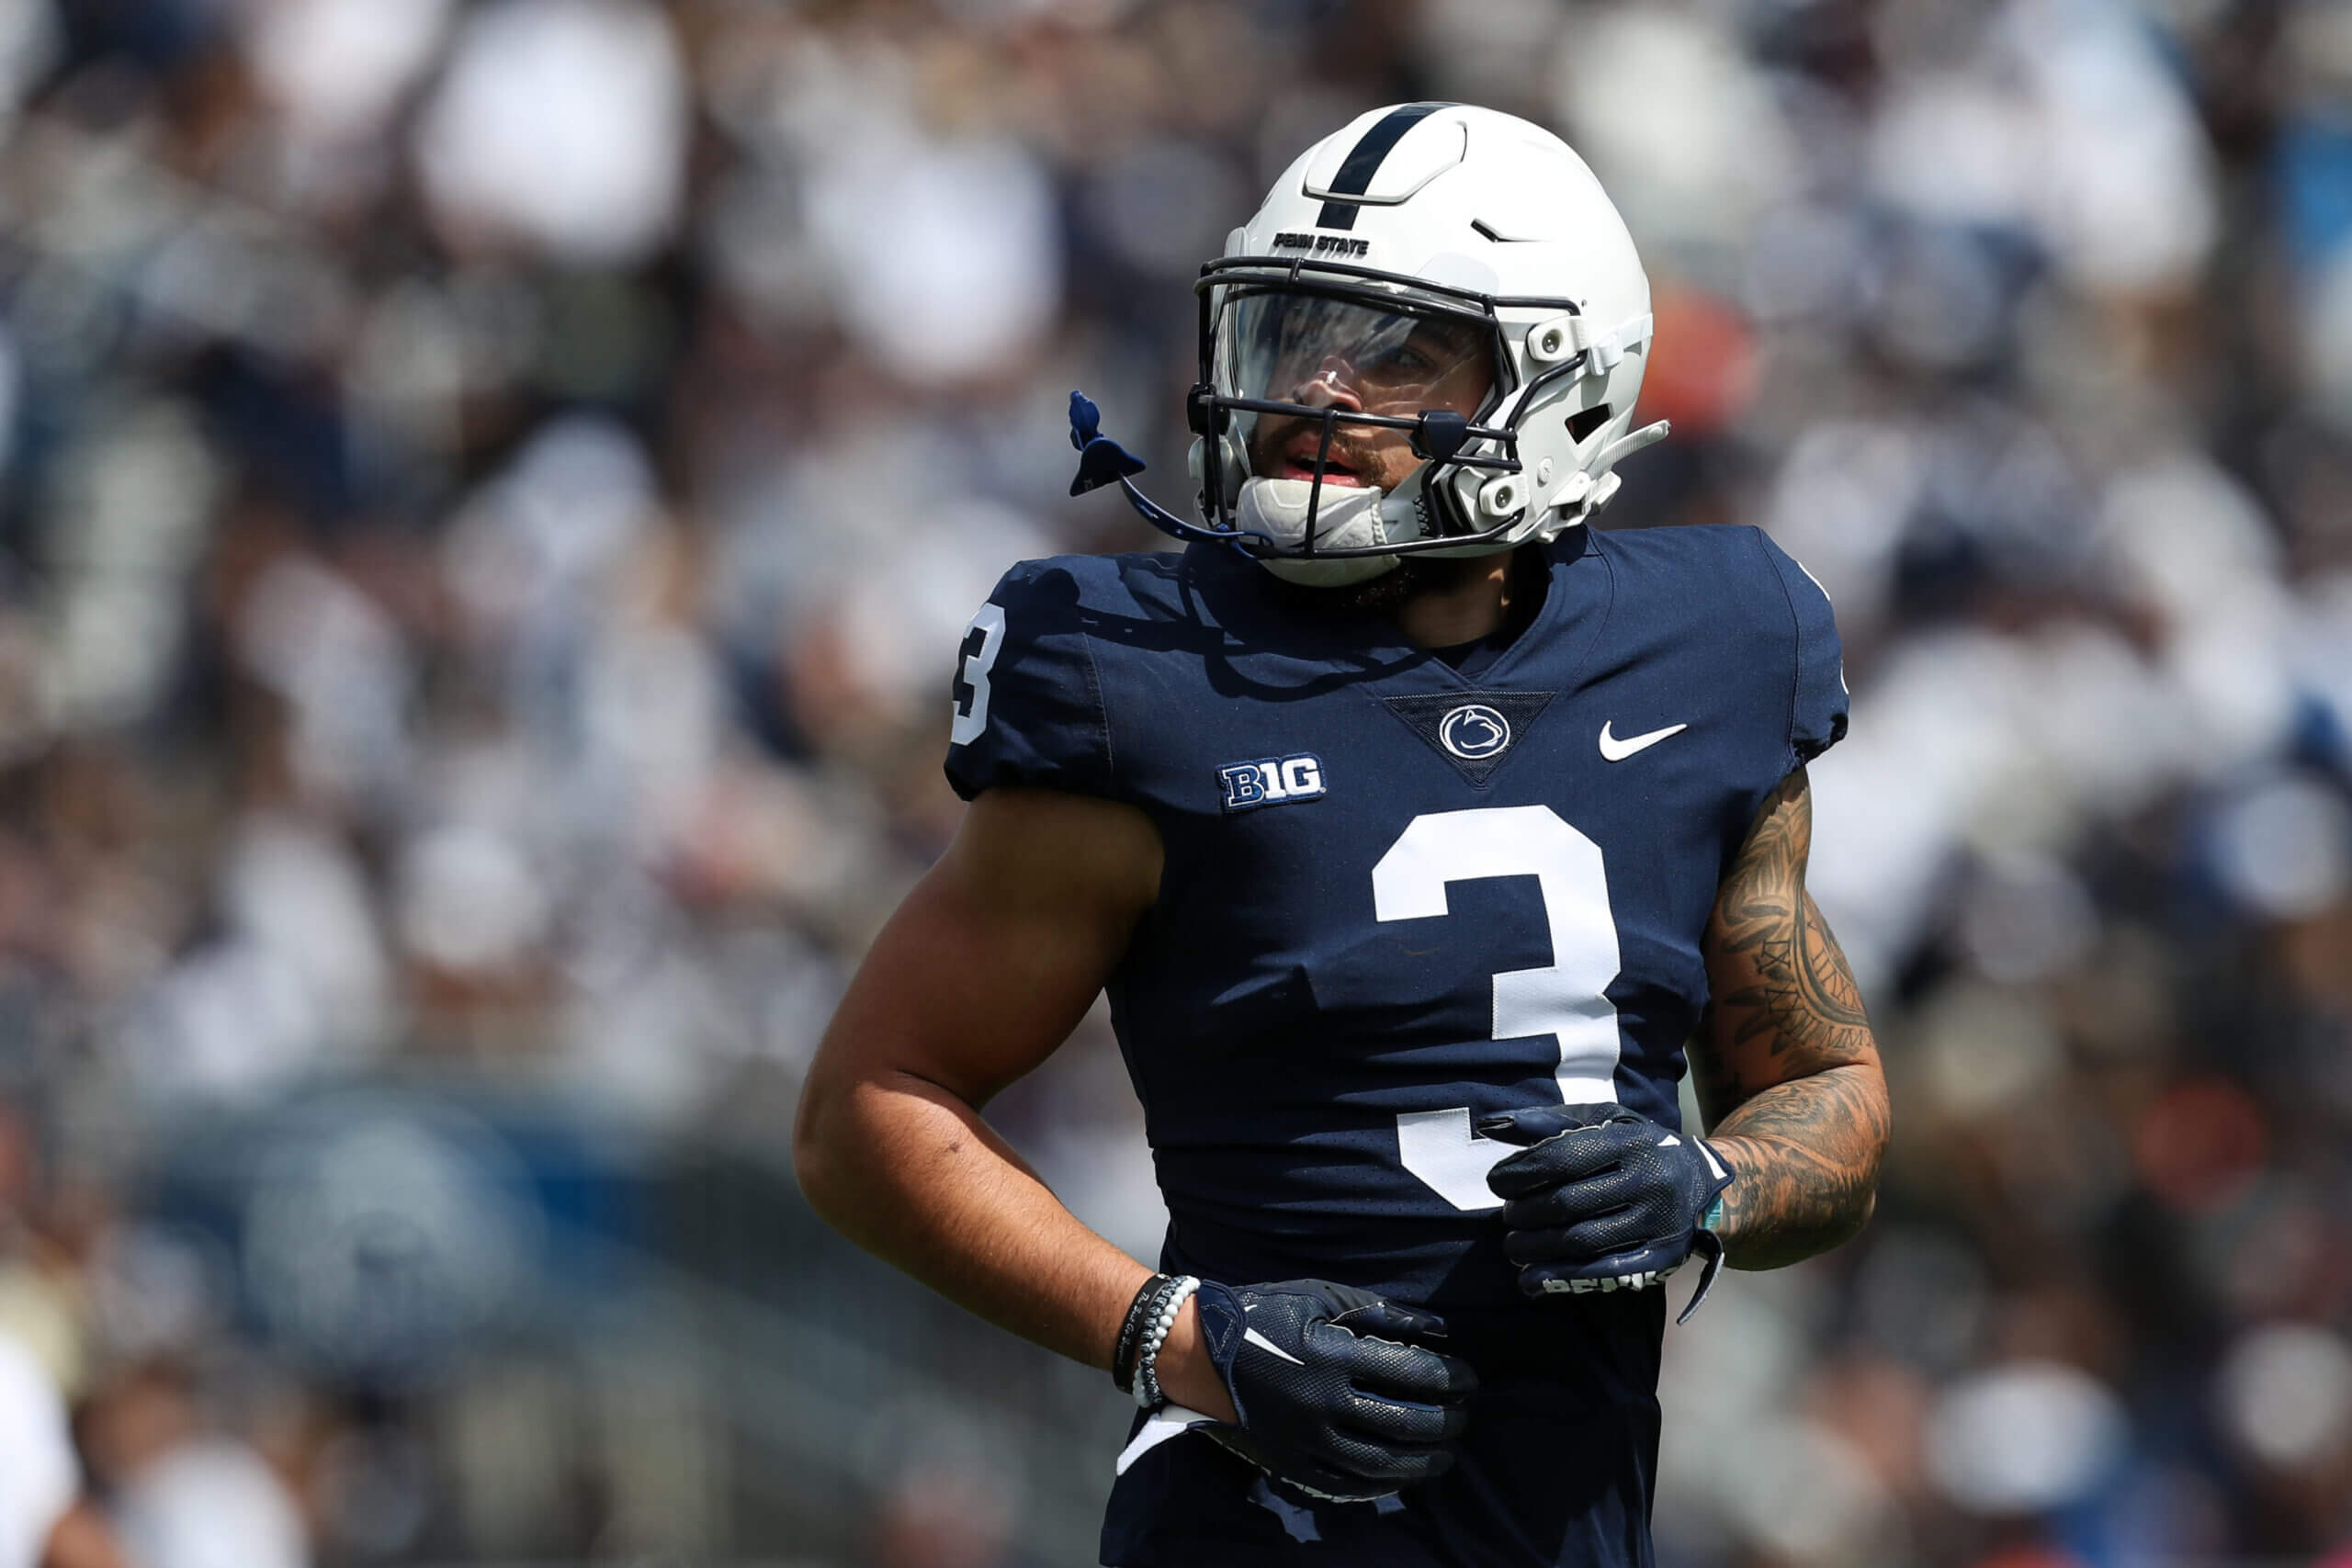 Nittany Lions mailbag: Should Penn State have added another WR? Are NIL efforts enough?